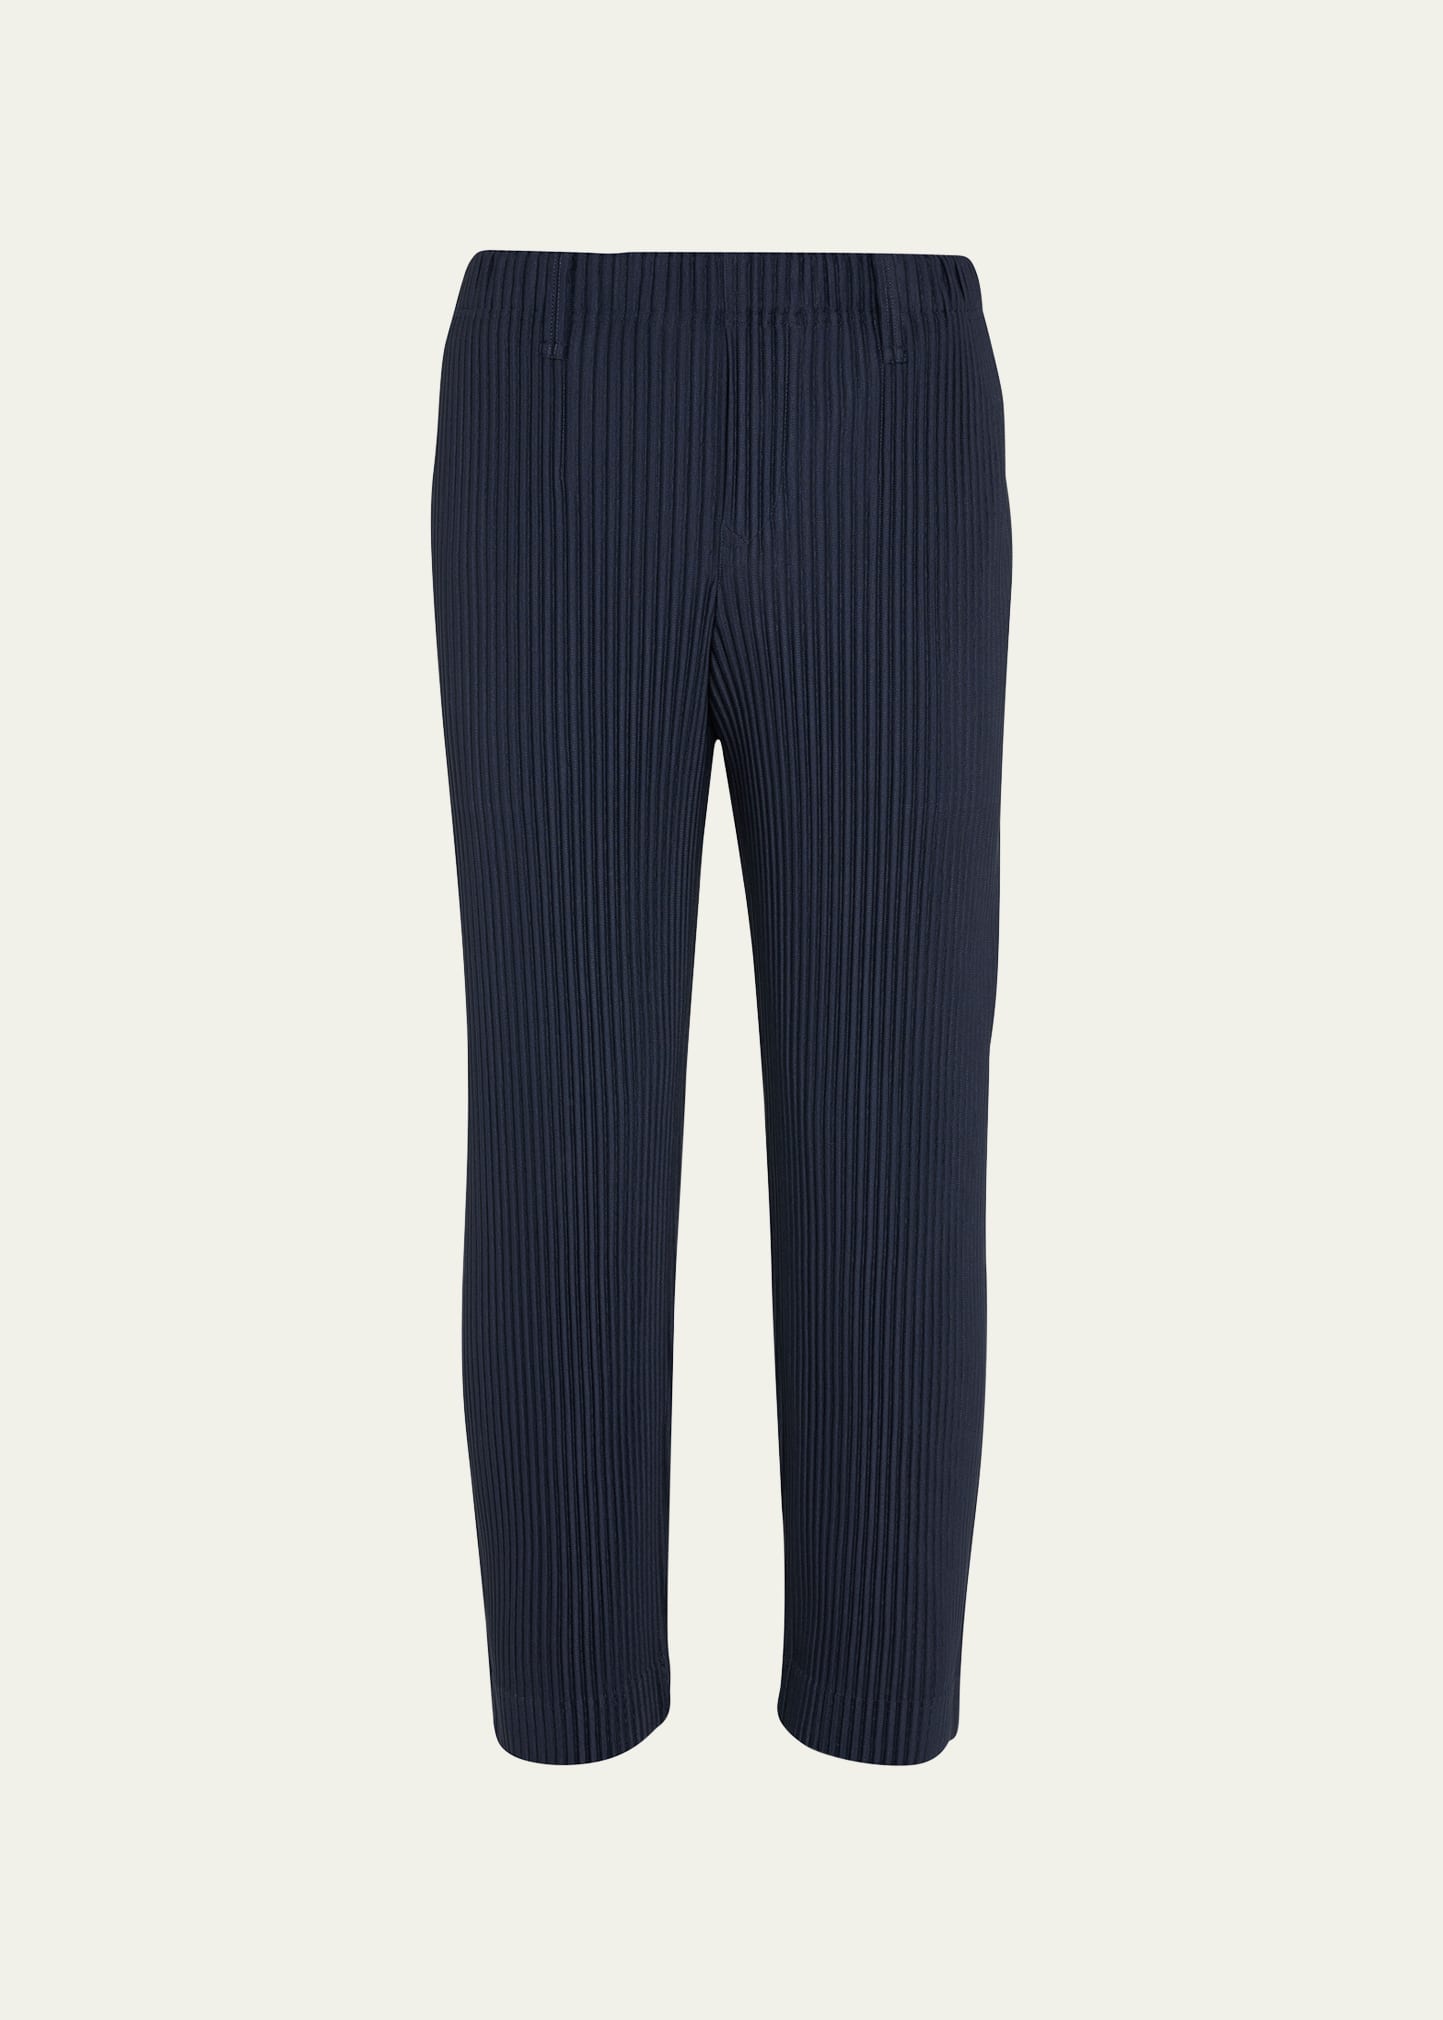 Issey Miyake Men's Pleated Polyester Pants In Navy